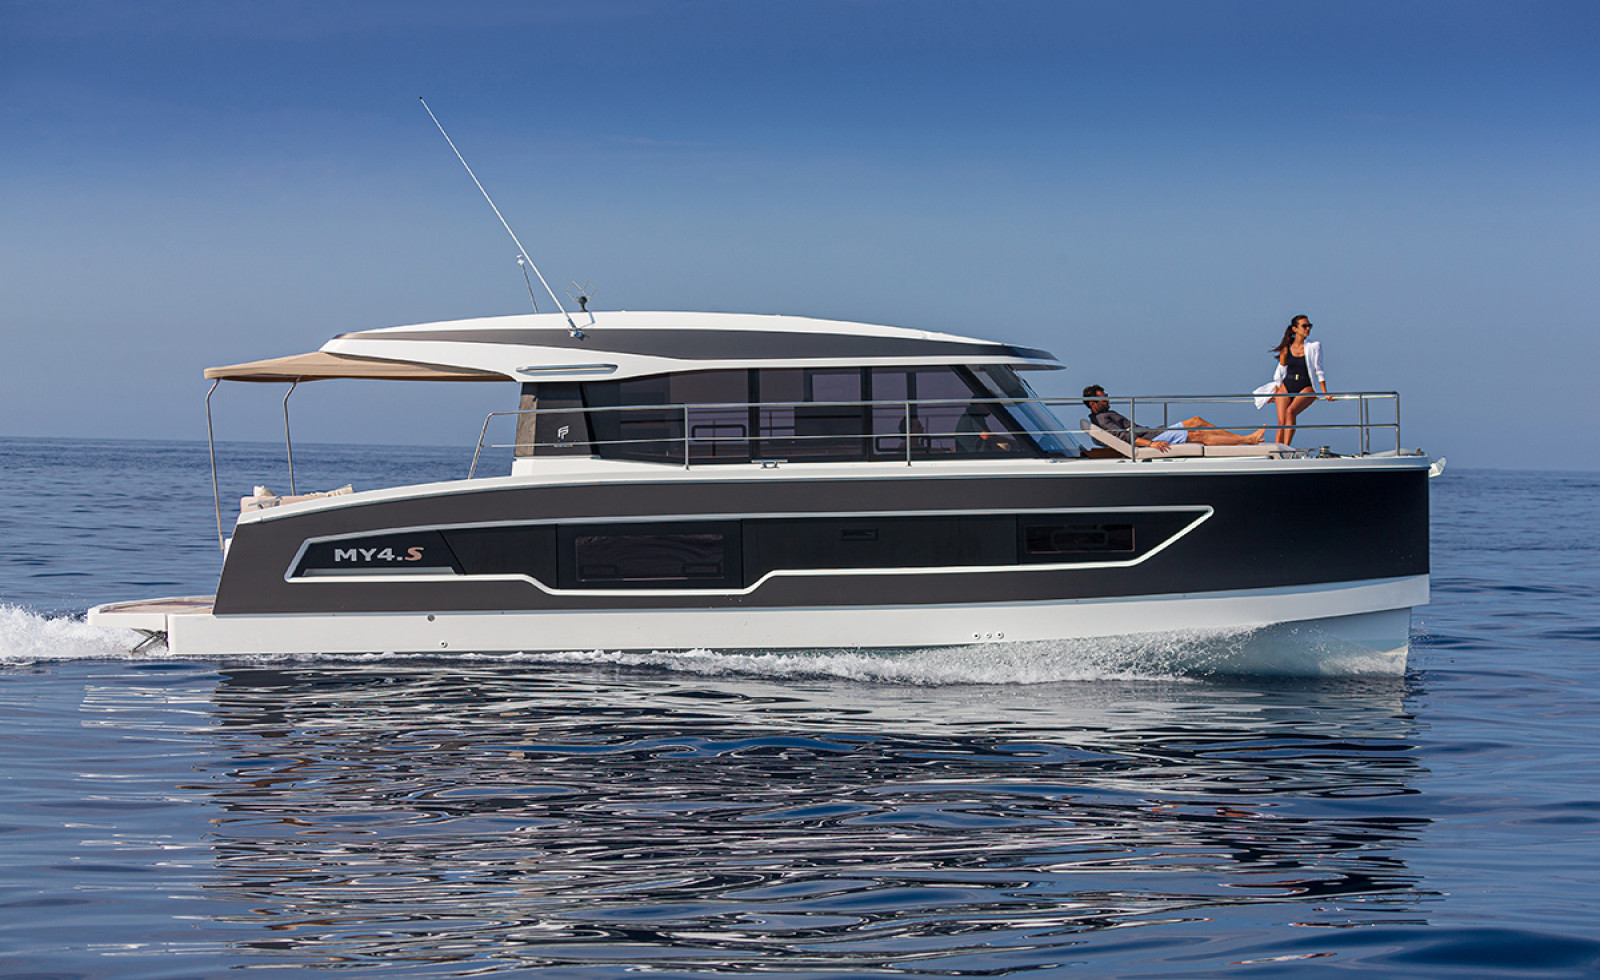 New model and new name for the range of motor yachts catamarans